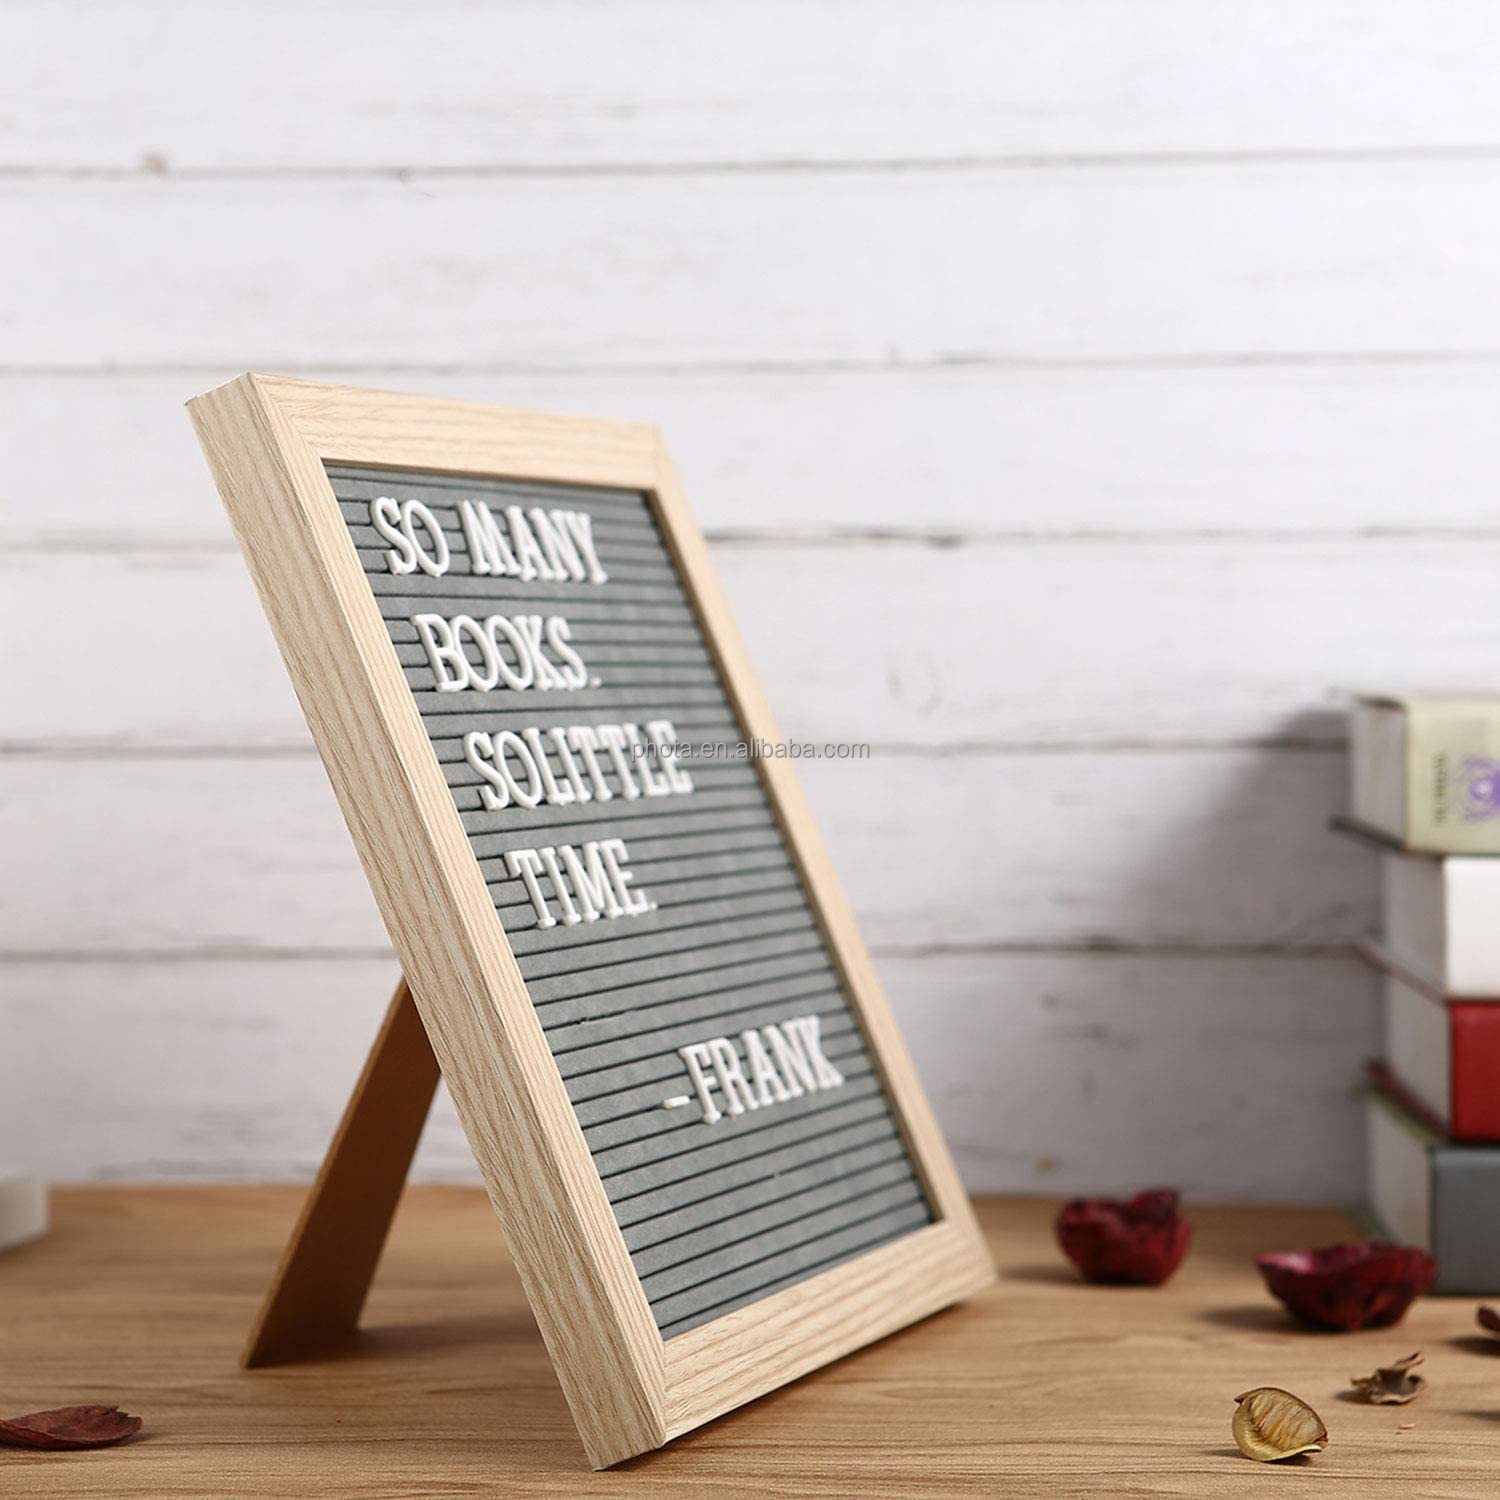 Felt Letter Board 10x10 Inches Changeable Wooden Message Board Sign Wood Frame Wall Mount Free Standing